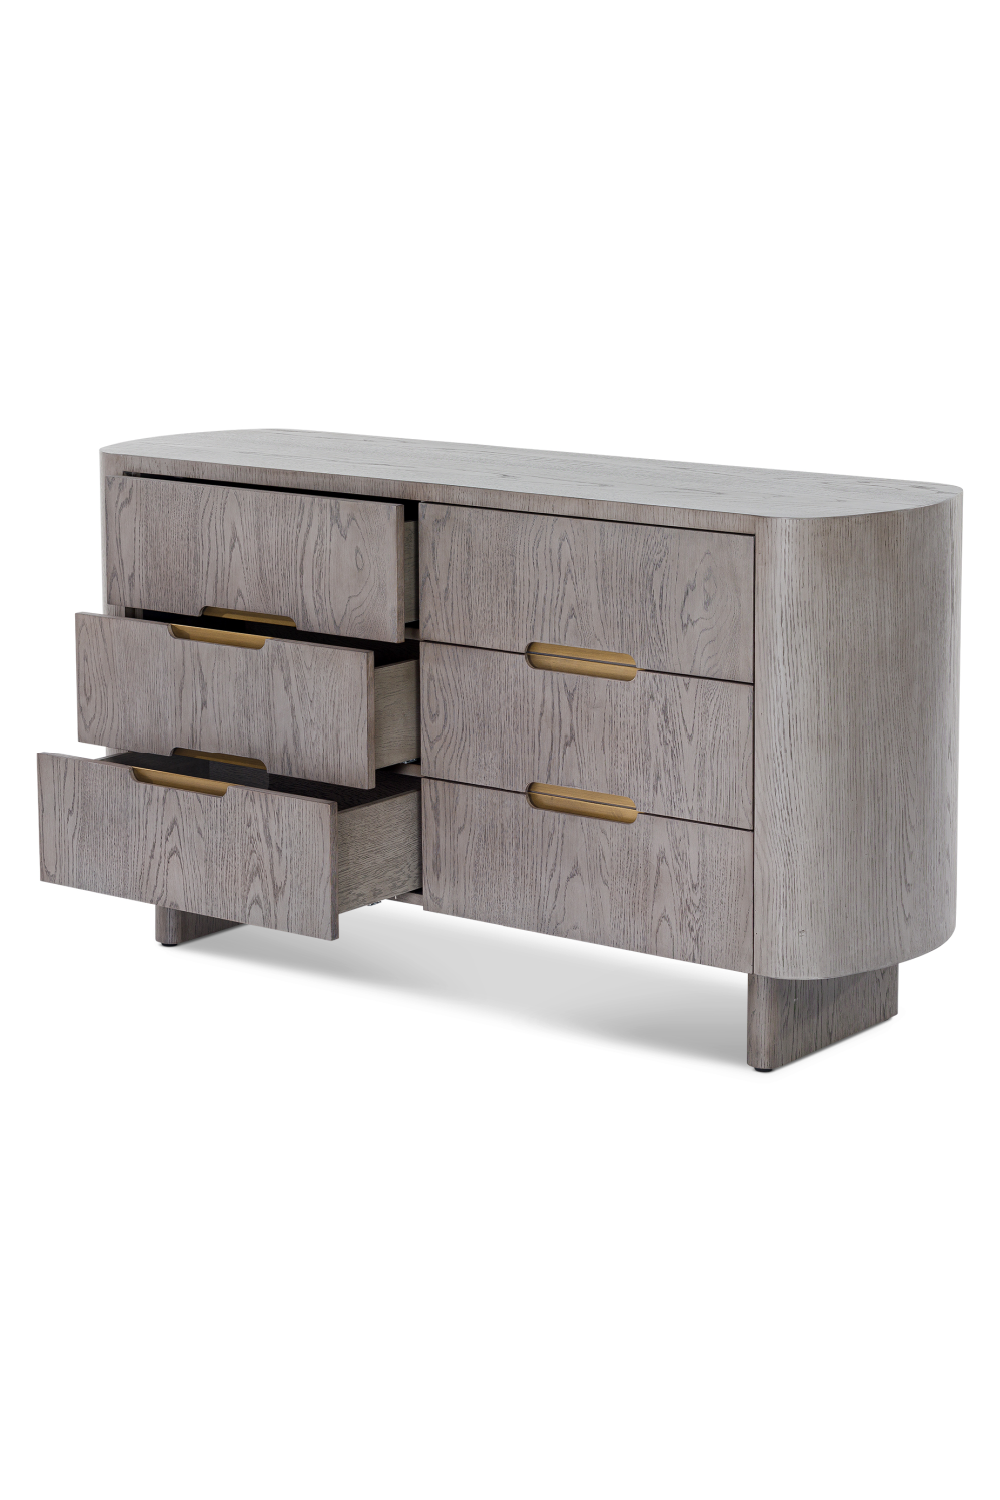 Oak Chest of Drawers | Liang & Eimil Lettos | Oroa.com